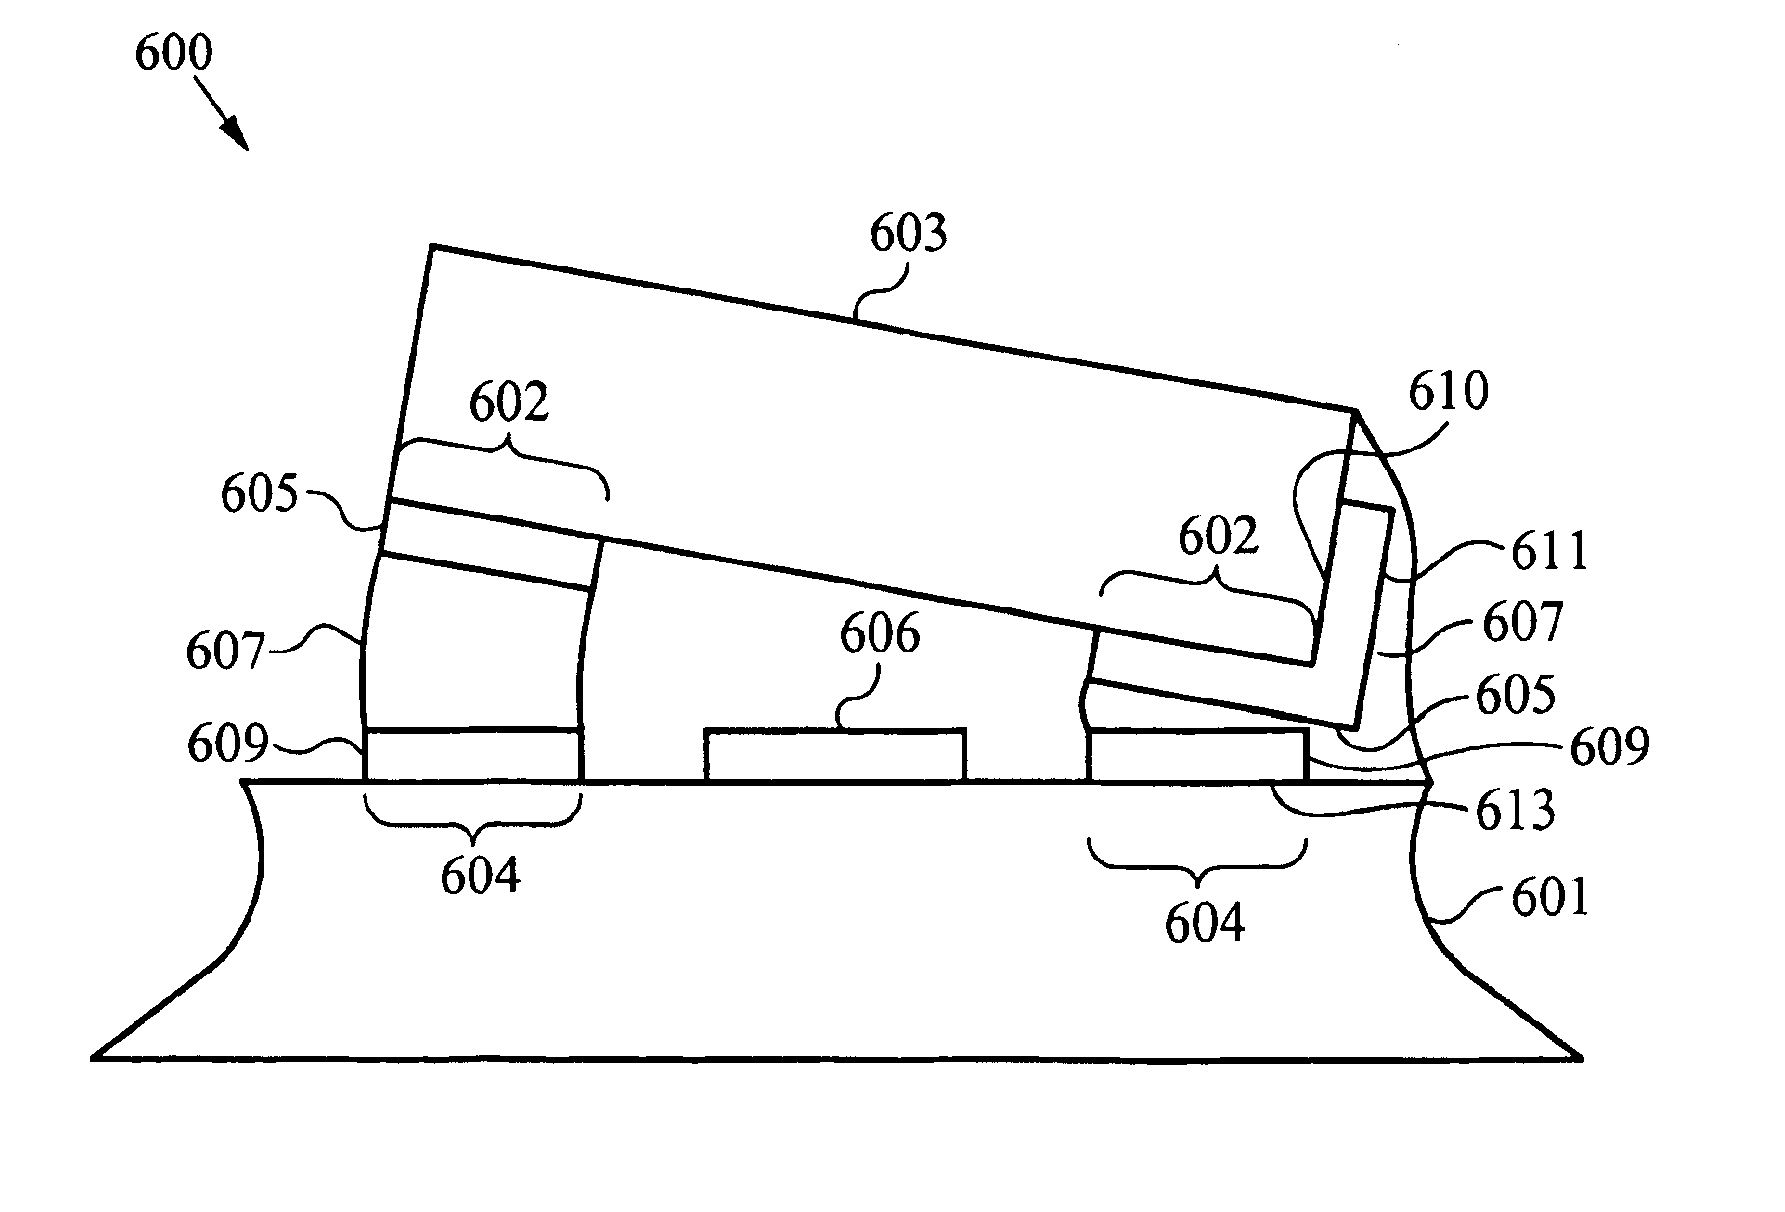 Method of sealing a hermetic lid to a semiconductor die at an angle